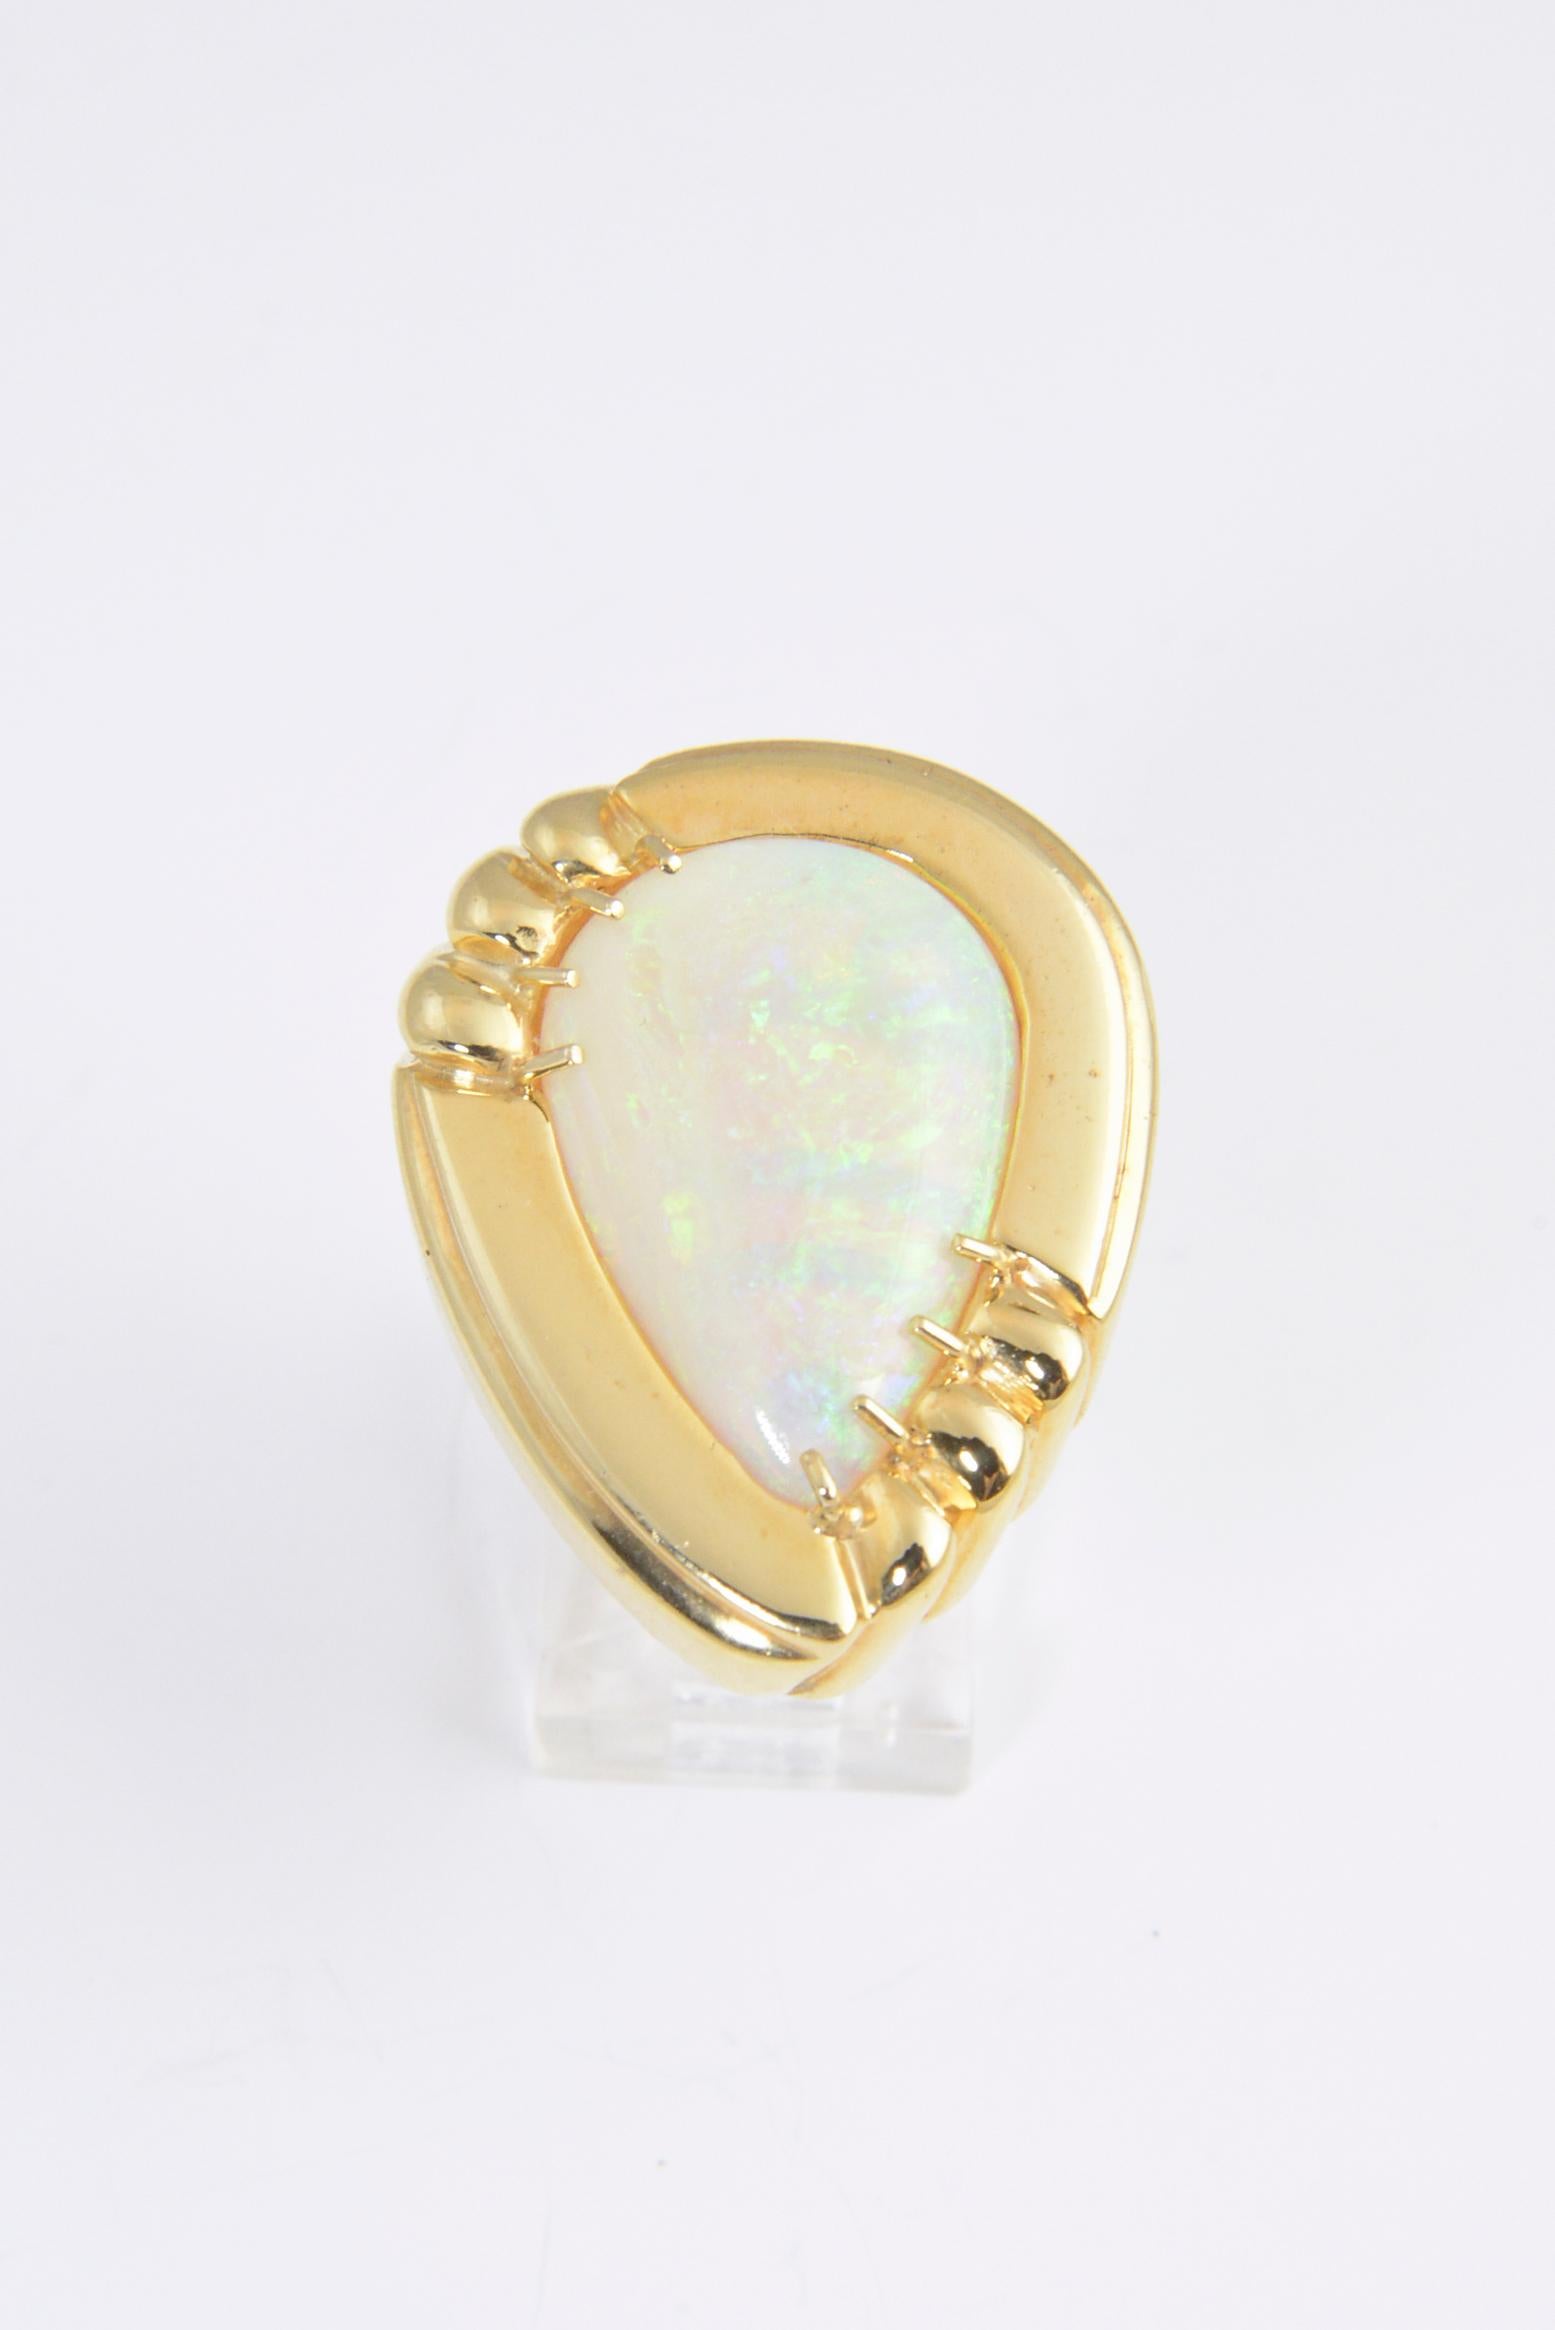 Large statement cocktail ring featuring a pear shaped opal mounted in a 1970s 14k yellow gold stylized frame. 
US Size: 6. It can be resized.